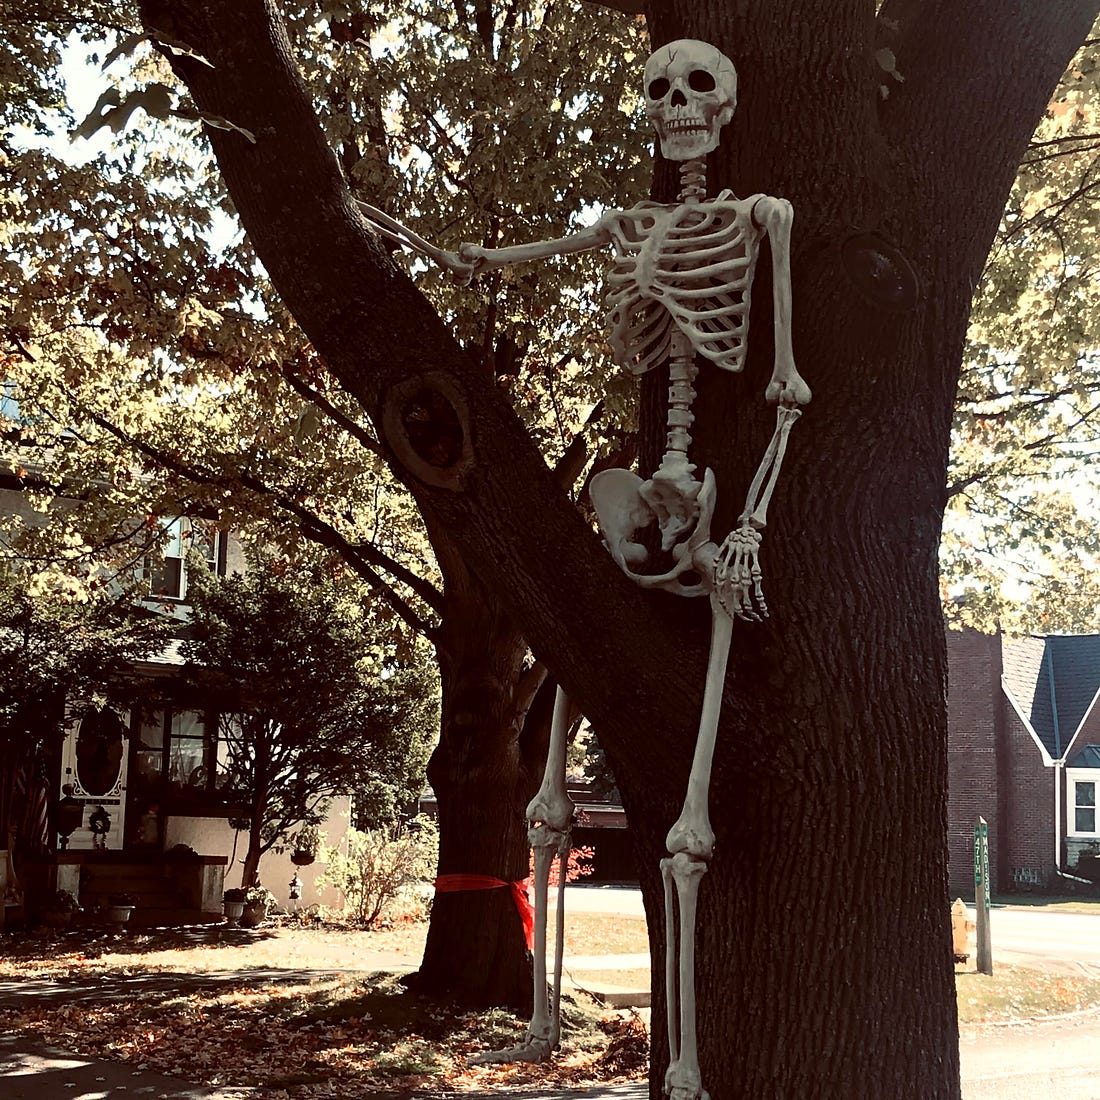 A skeleton Halloween decoration sitting on a tree branch.